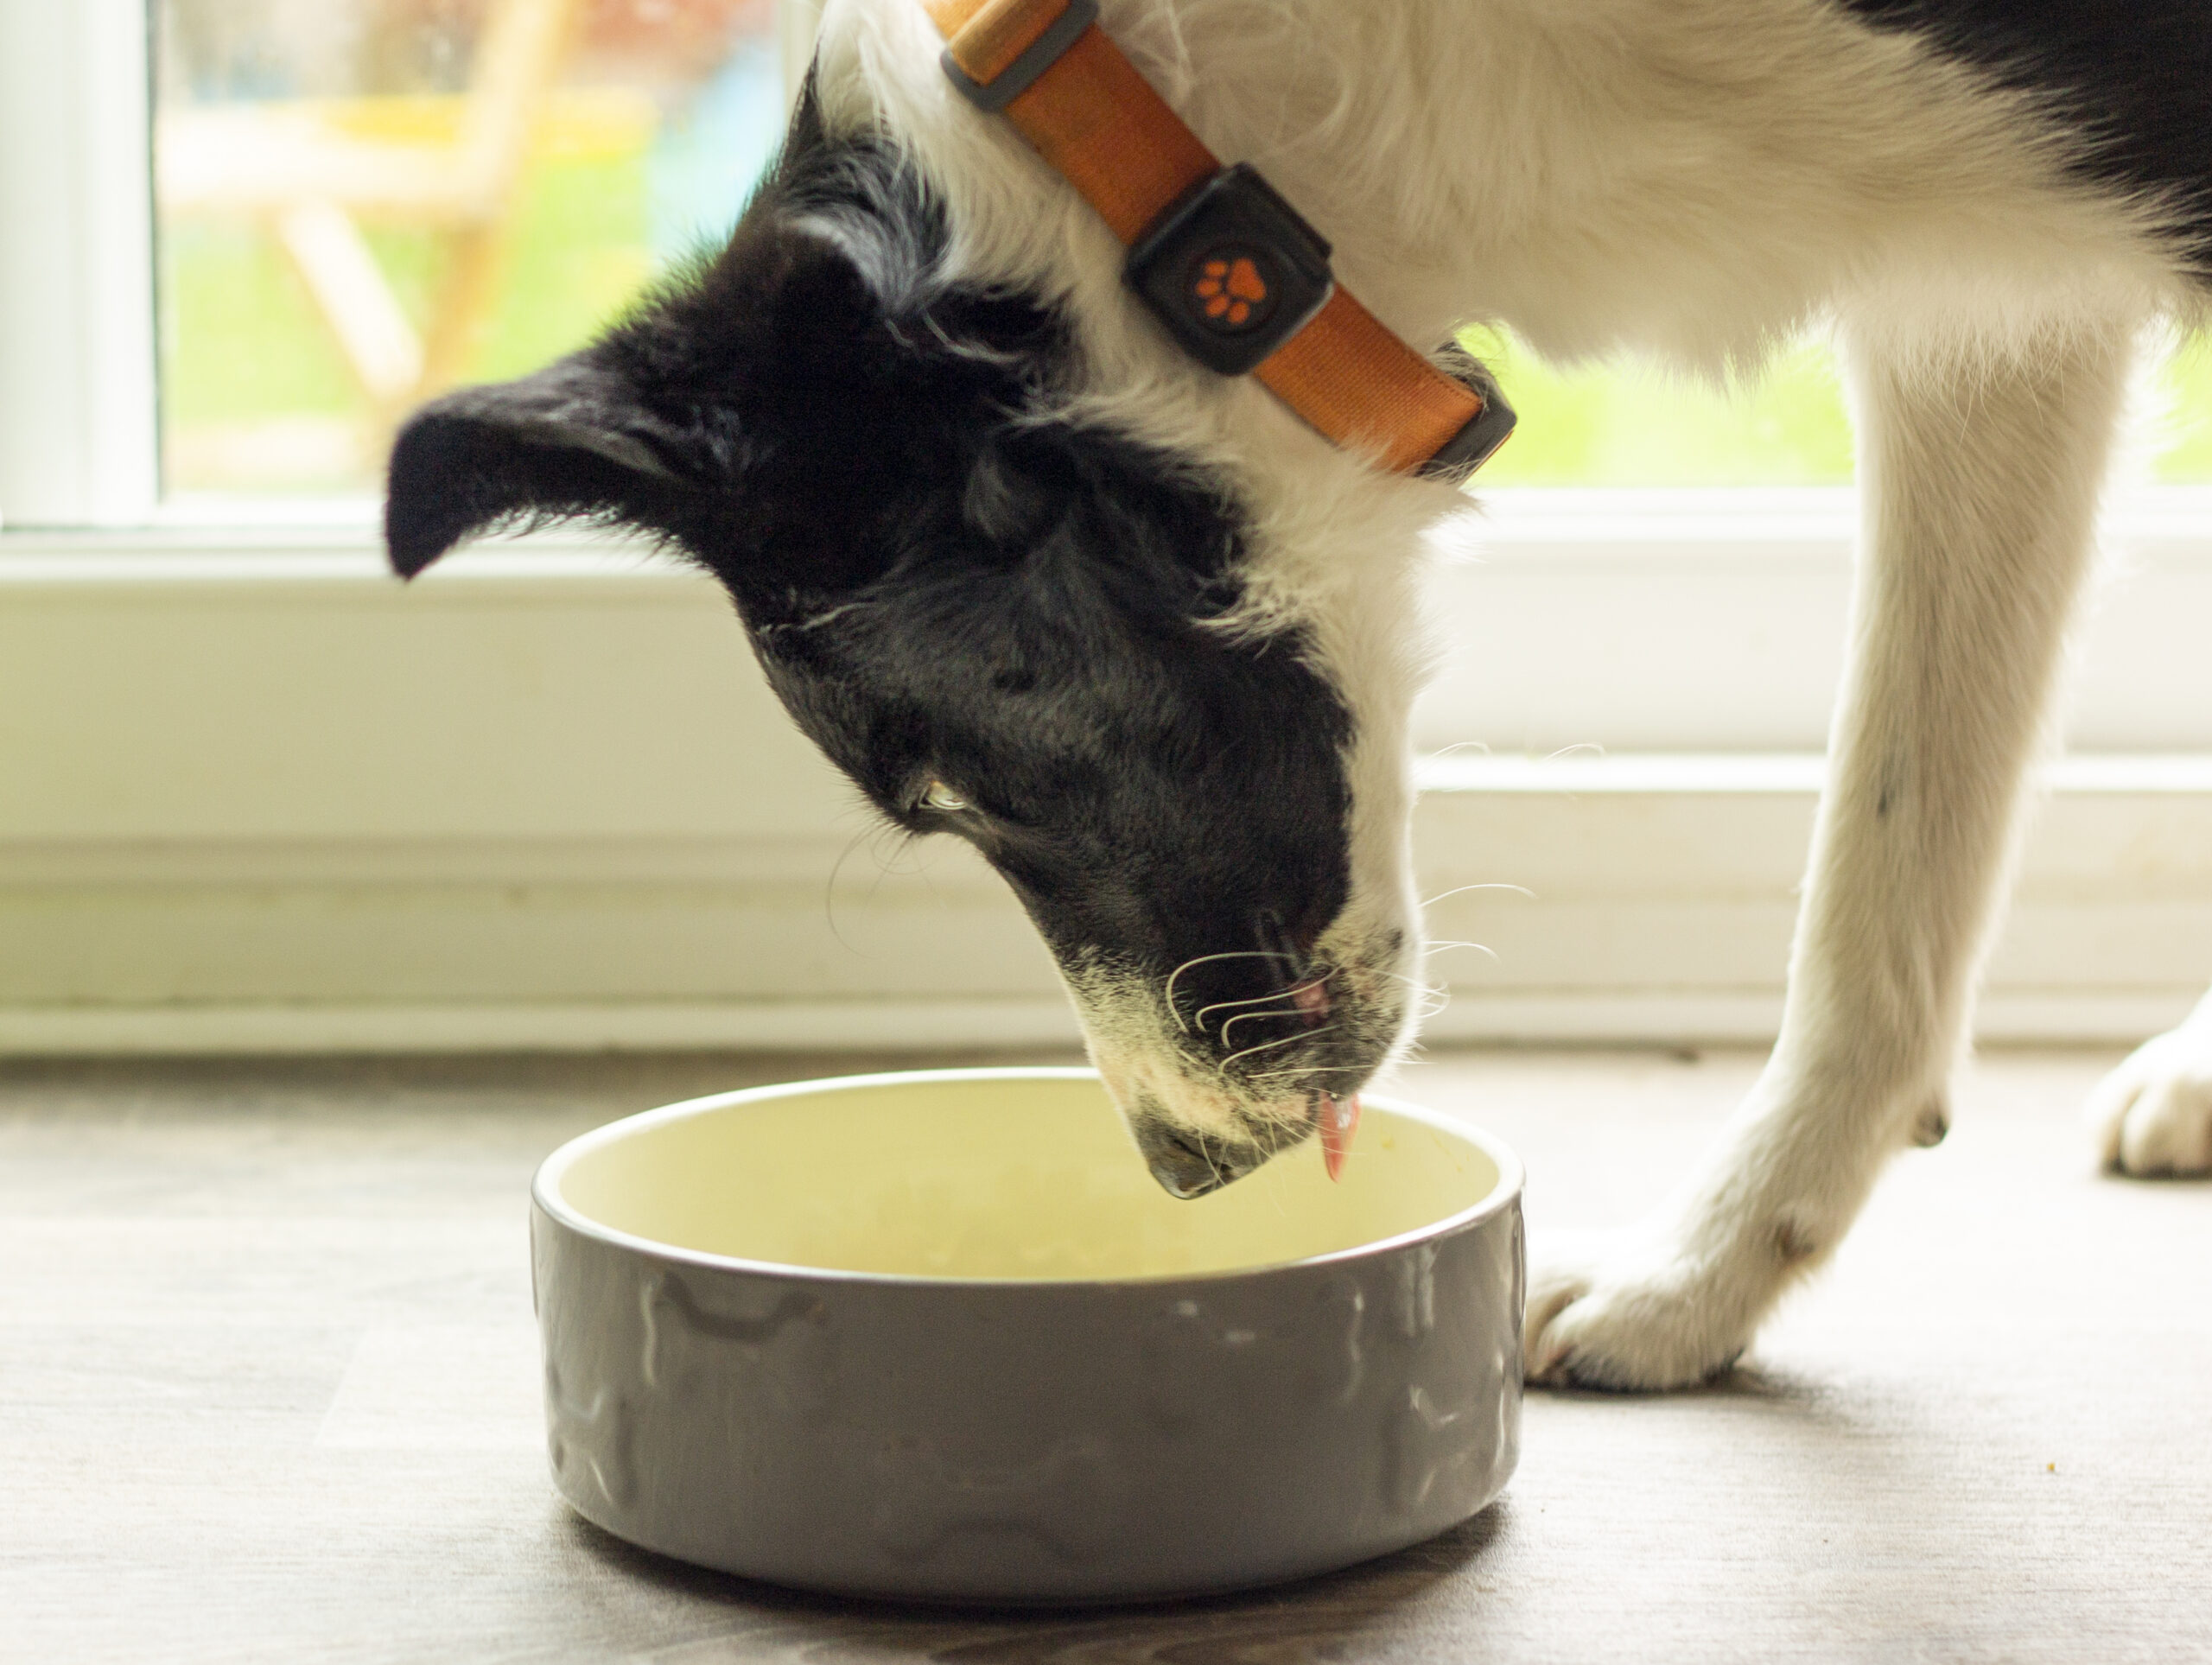 Border Collie eating from a bowl wearing a PitPat Dog Activity Monitor